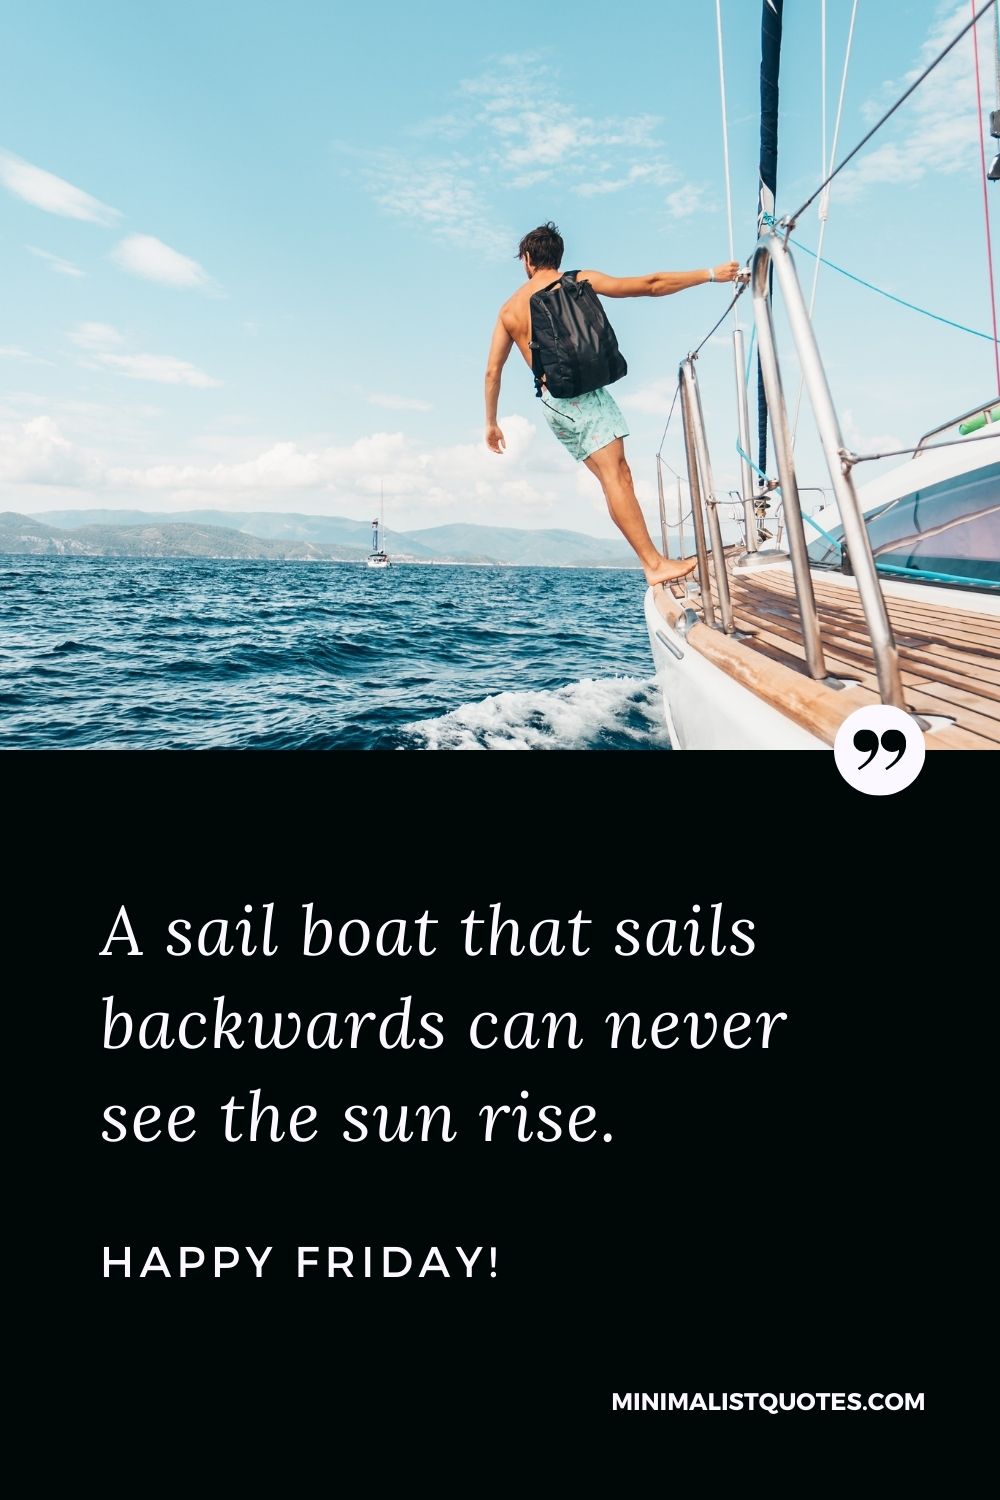 Friday Quote, Wish & Message With Image: A sail boat that sails backwards can never see the sun rise. Happy Friday!